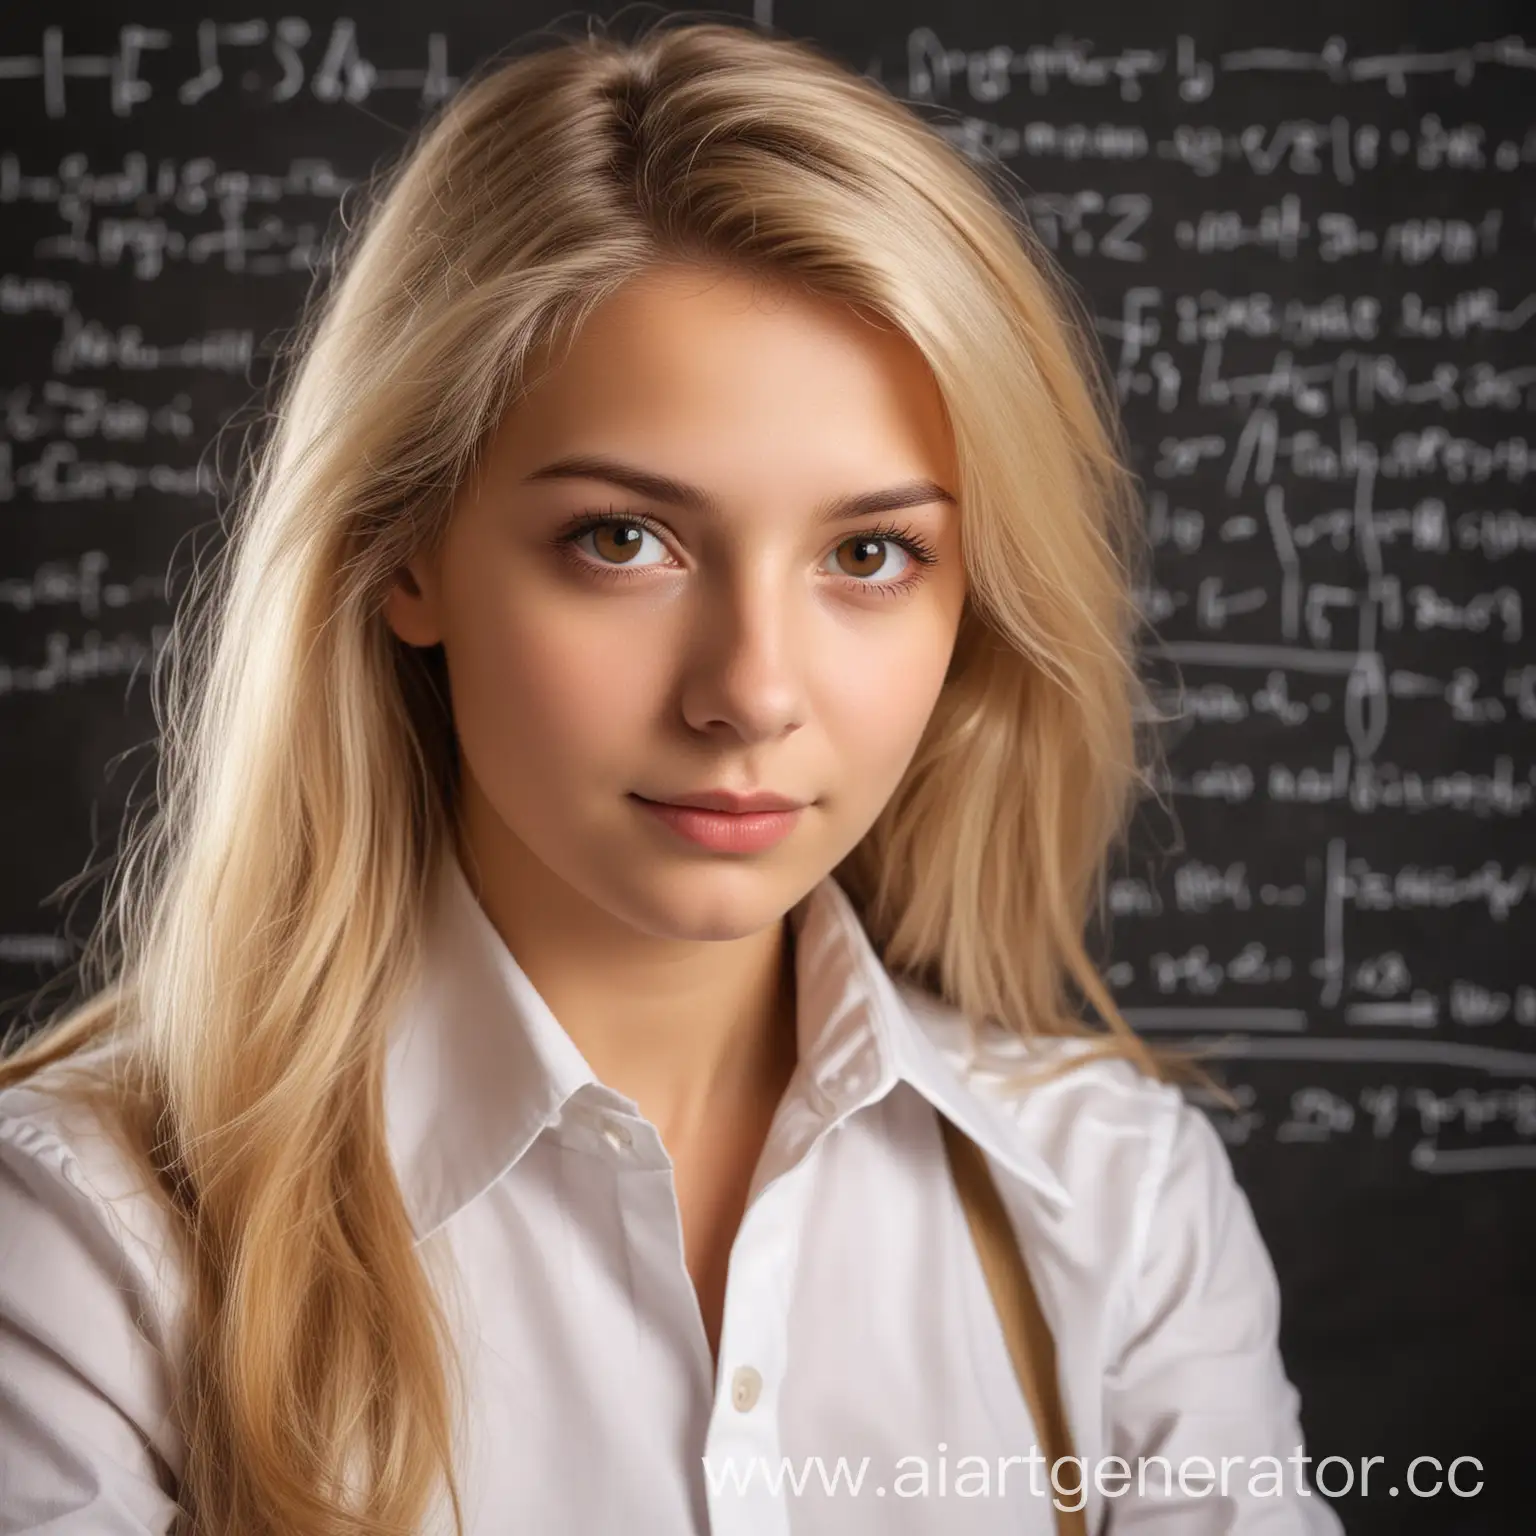 Young-Girl-Mathematician-and-Physicist-with-Brown-Eyes-and-Blonde-Hair-Real-Photo